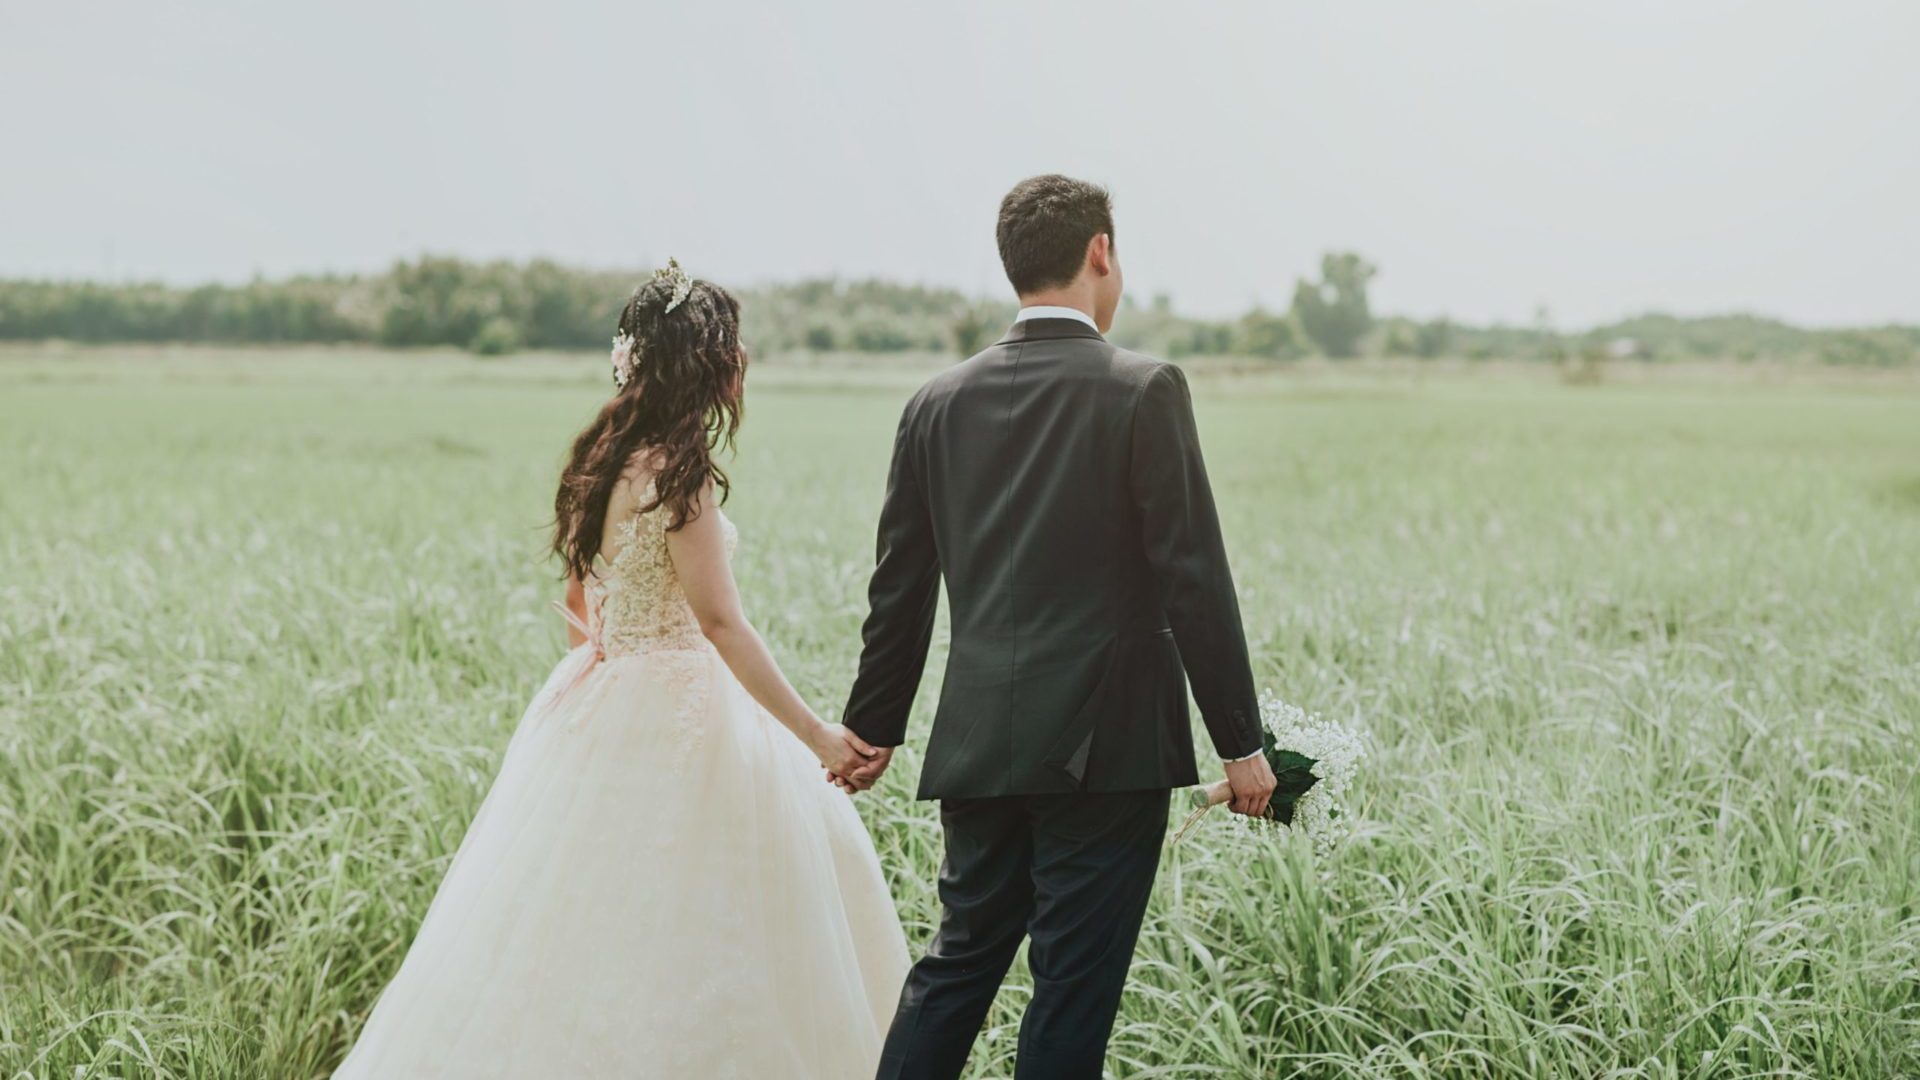 woman-in-white-wedding-dress-holding-hand-to-man-in-black-752842